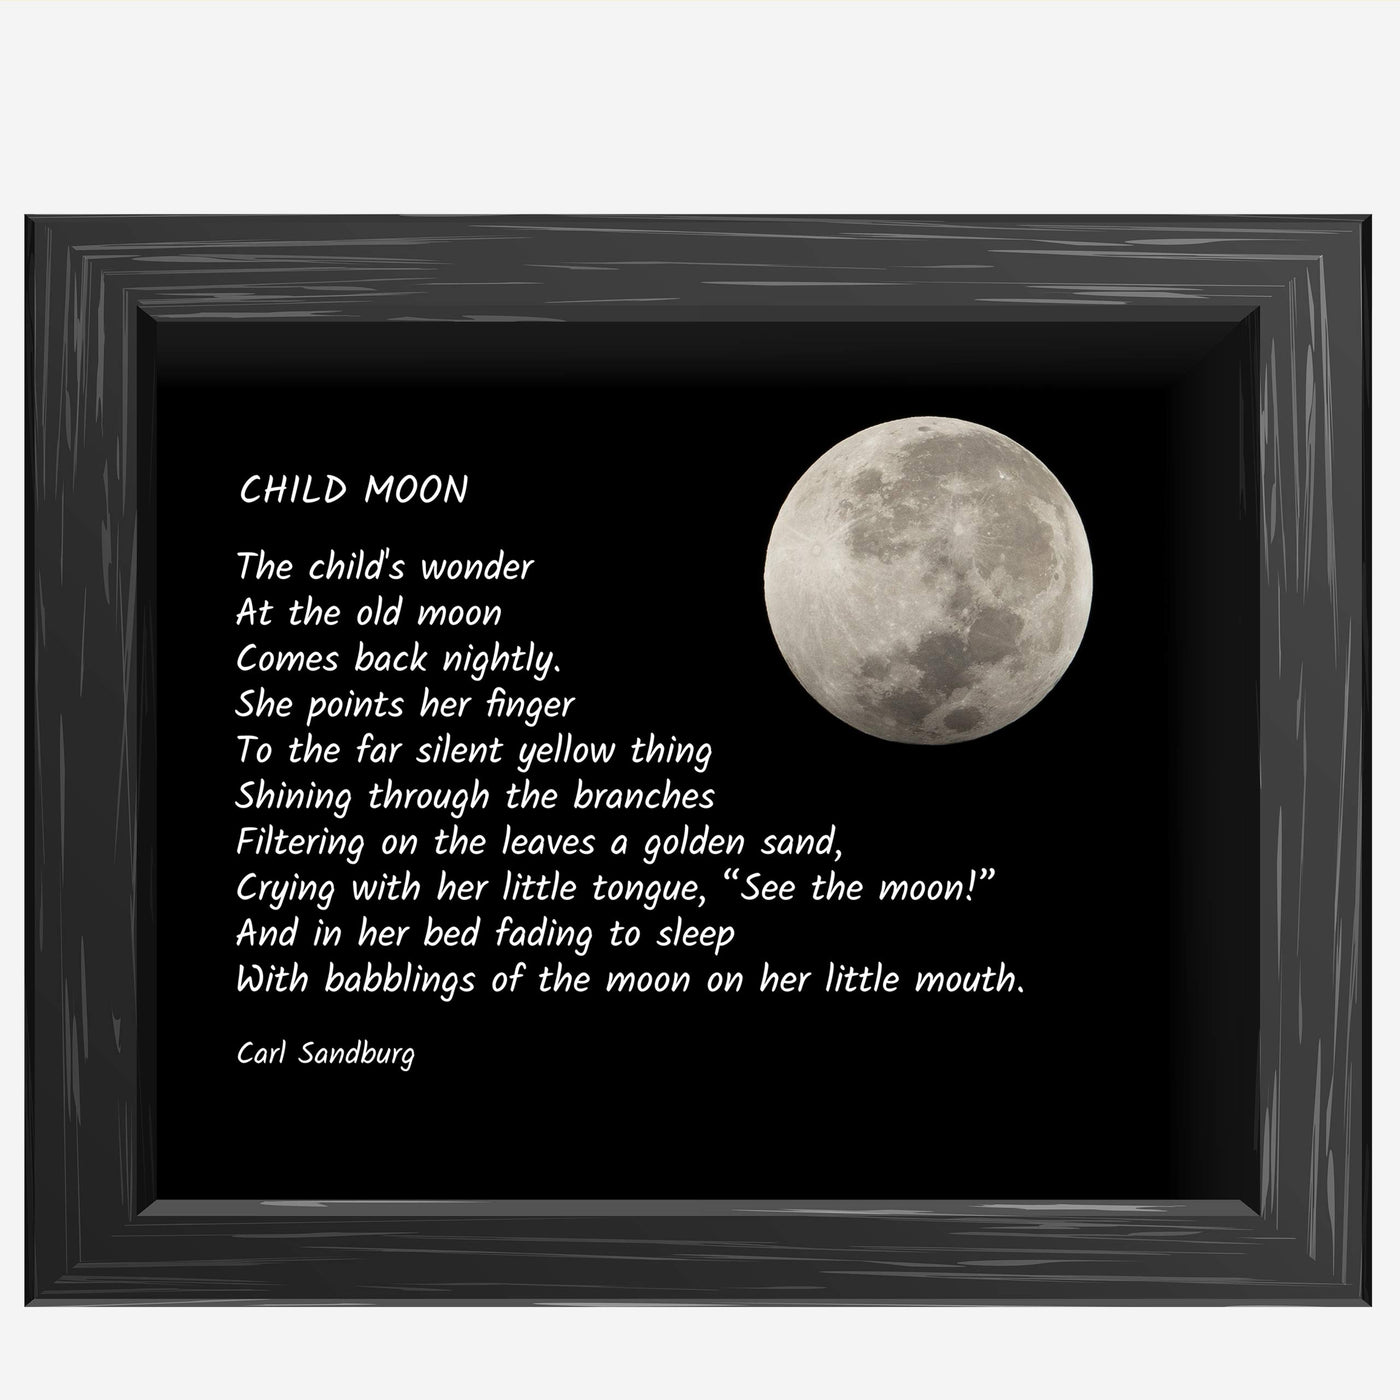 Carl Sandburg Quotes-?Child Moon" Poetic Wall Art Sign -10x8" Inspirational Poster Print with Full Moon Image-Ready to Frame. Home-Office-Classroom-Library Decor. Perfect Nursery-Kids Bedroom Sign!